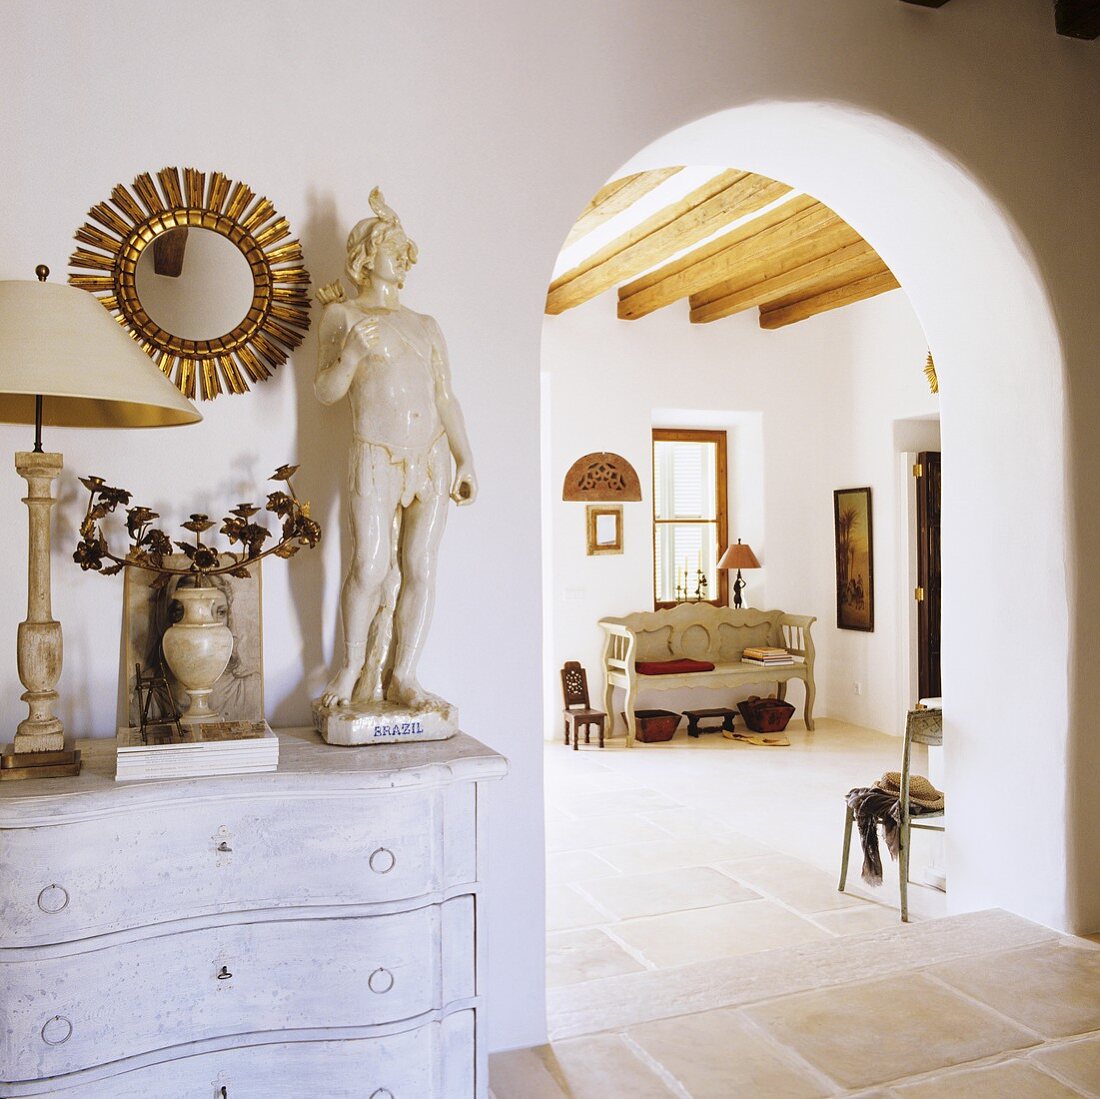 Antiques on a chest of drawers with a view through an arched doorway of a Mediterranean house